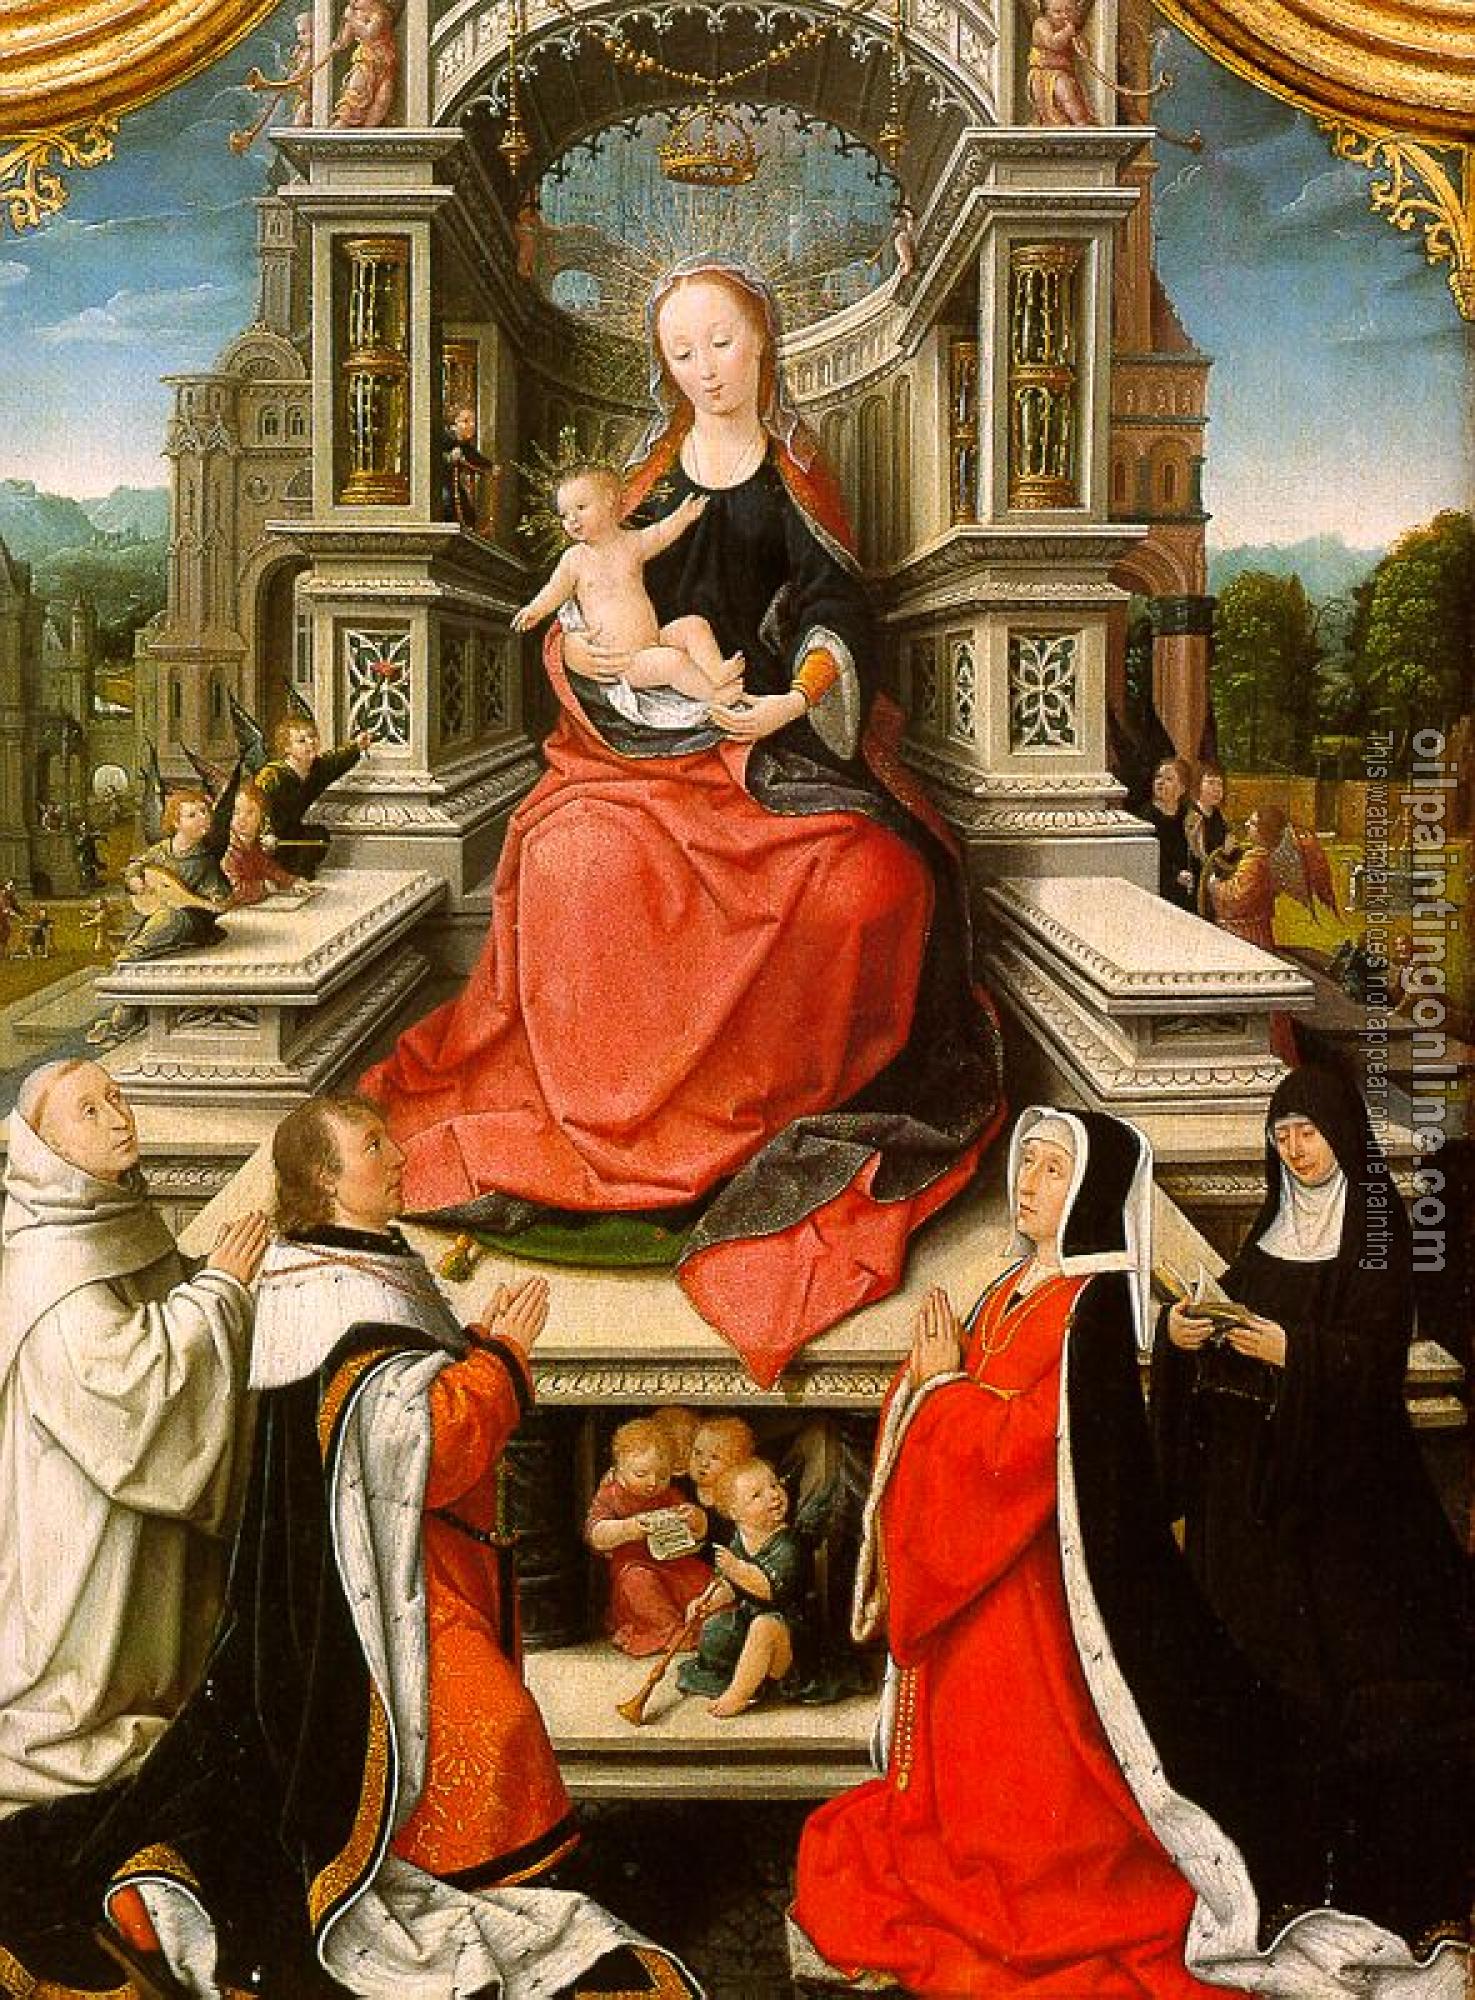 Bellegambe, Jean - The Retable of Le Cellier (triptych), central panel featuring The Virgin & Child